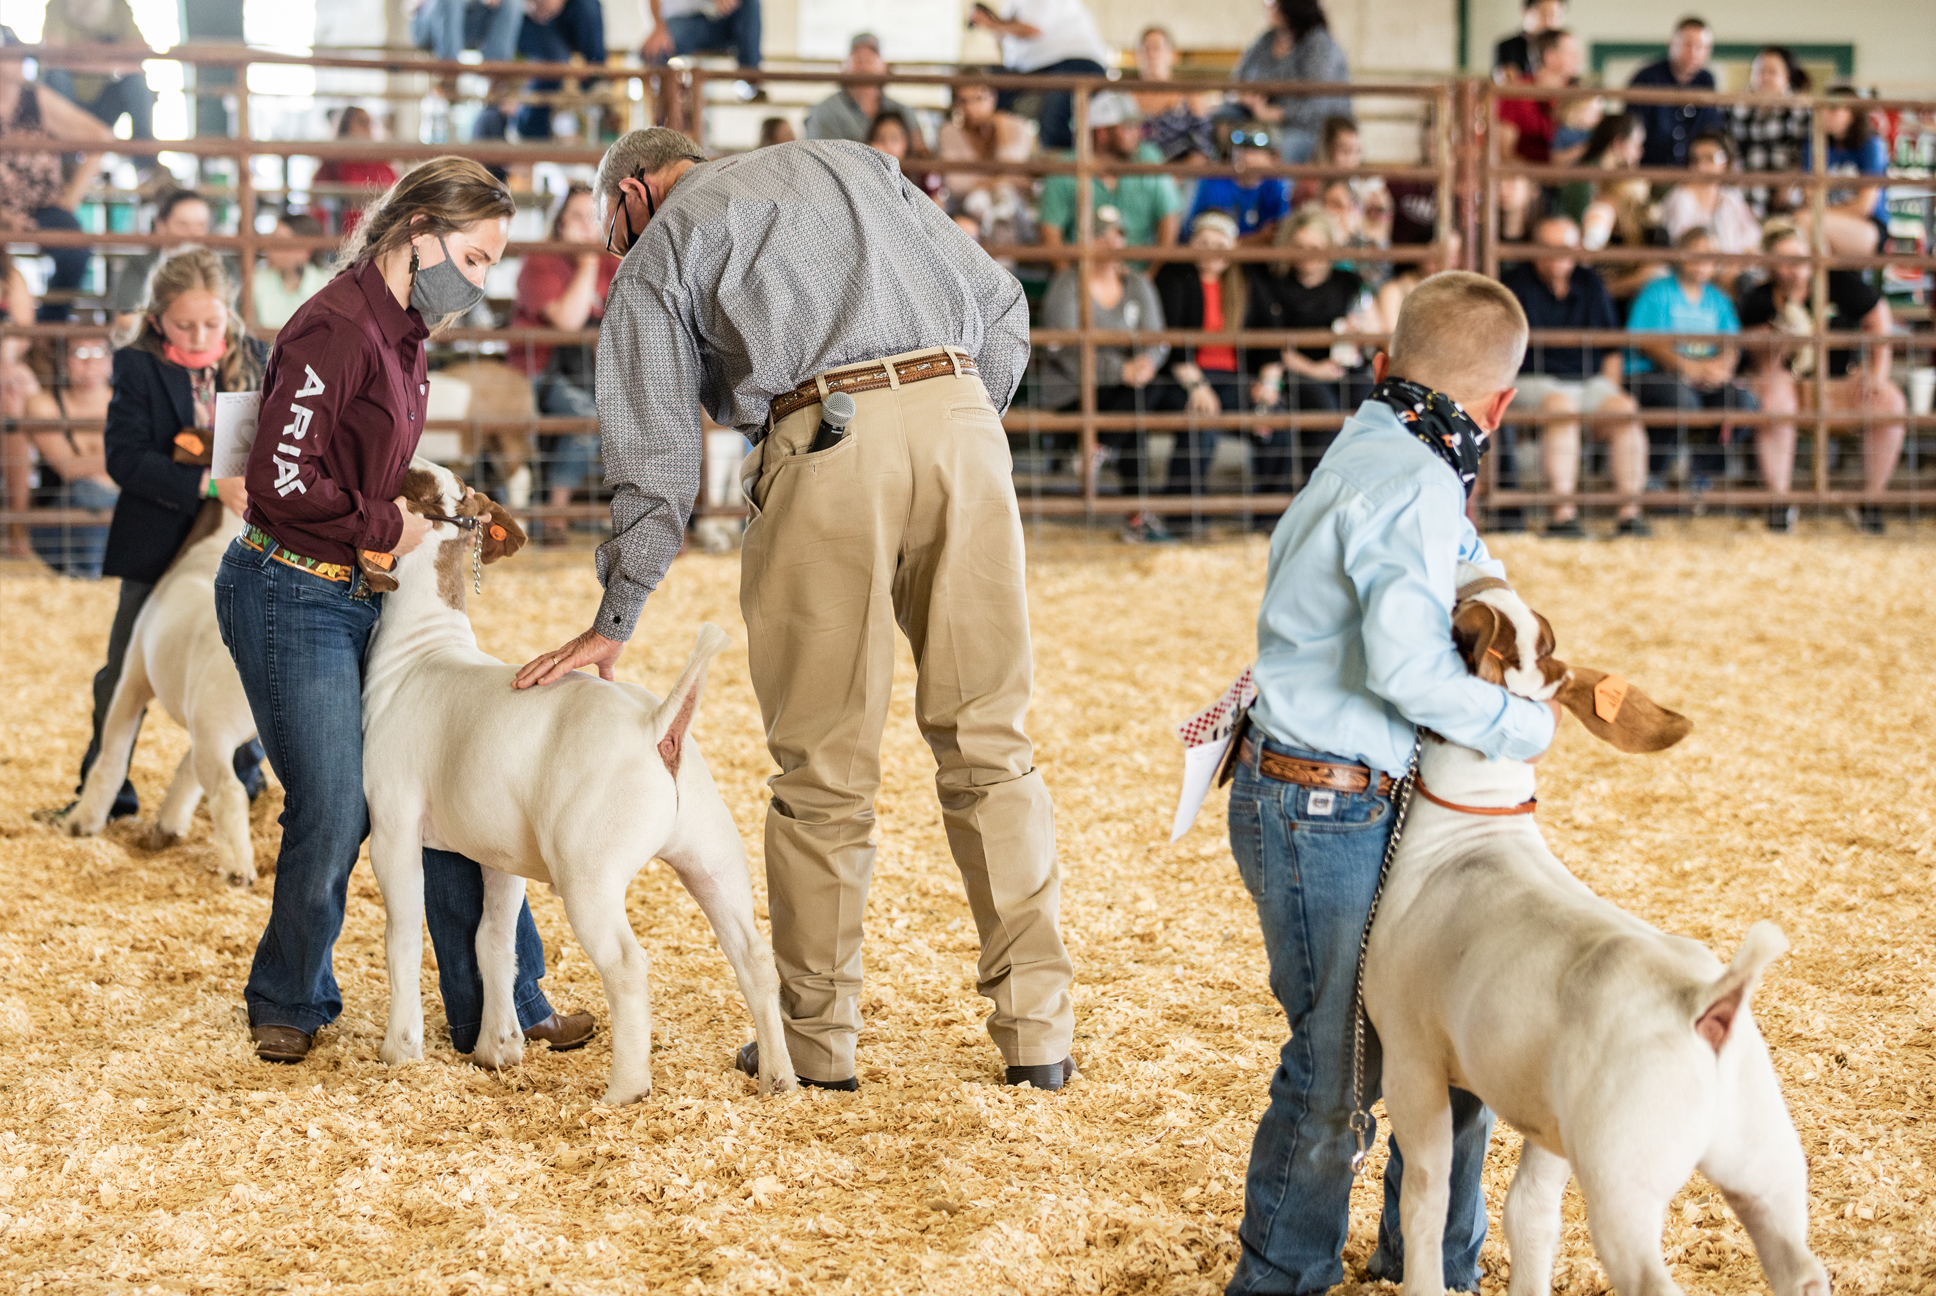 Union County Open Sheep and Market Goat Show - Chasing Banners and Buckles